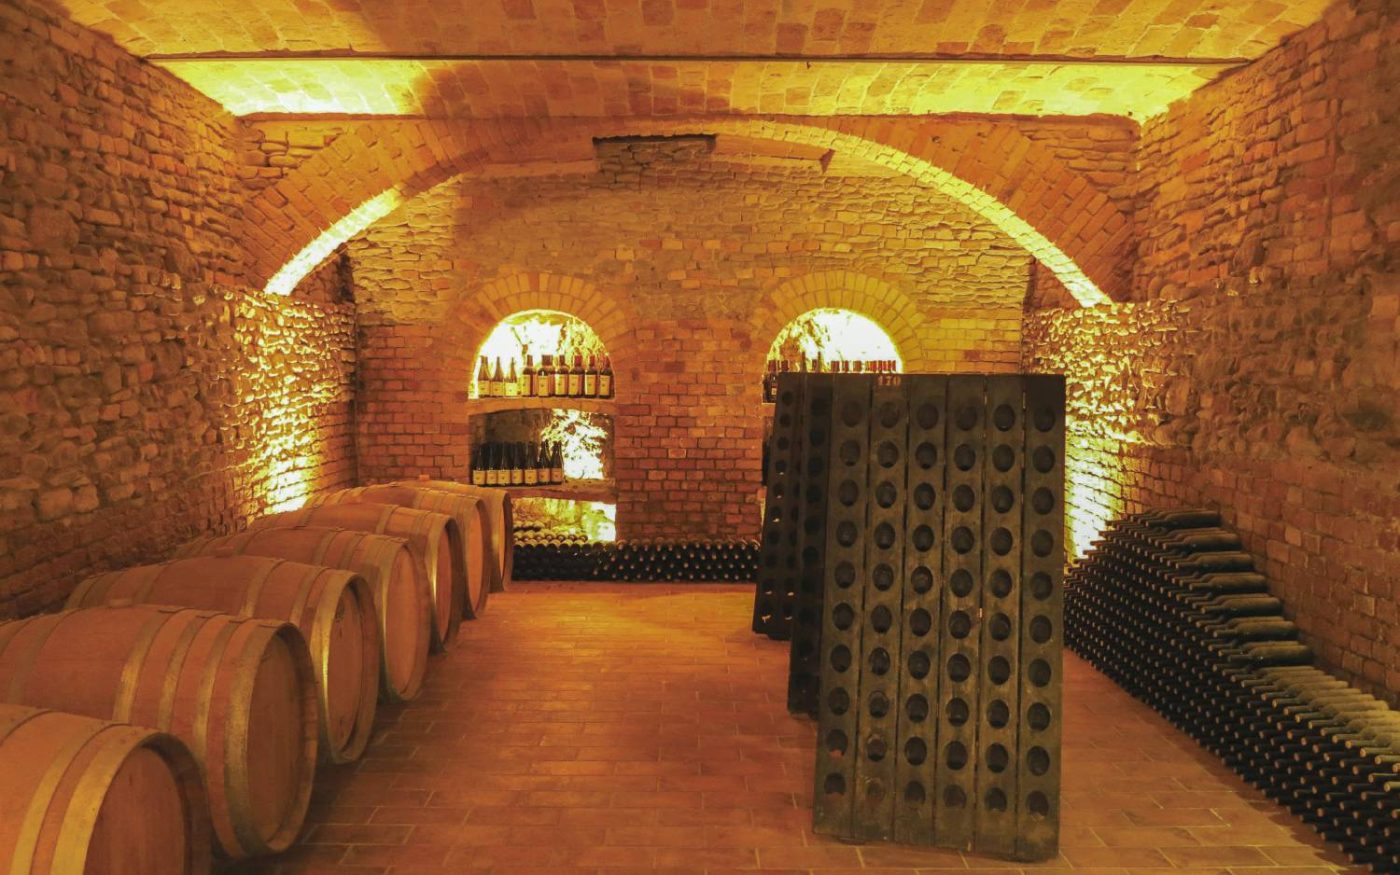 Among the barrels and barriques are a hundred bottles produced by the grandfather's